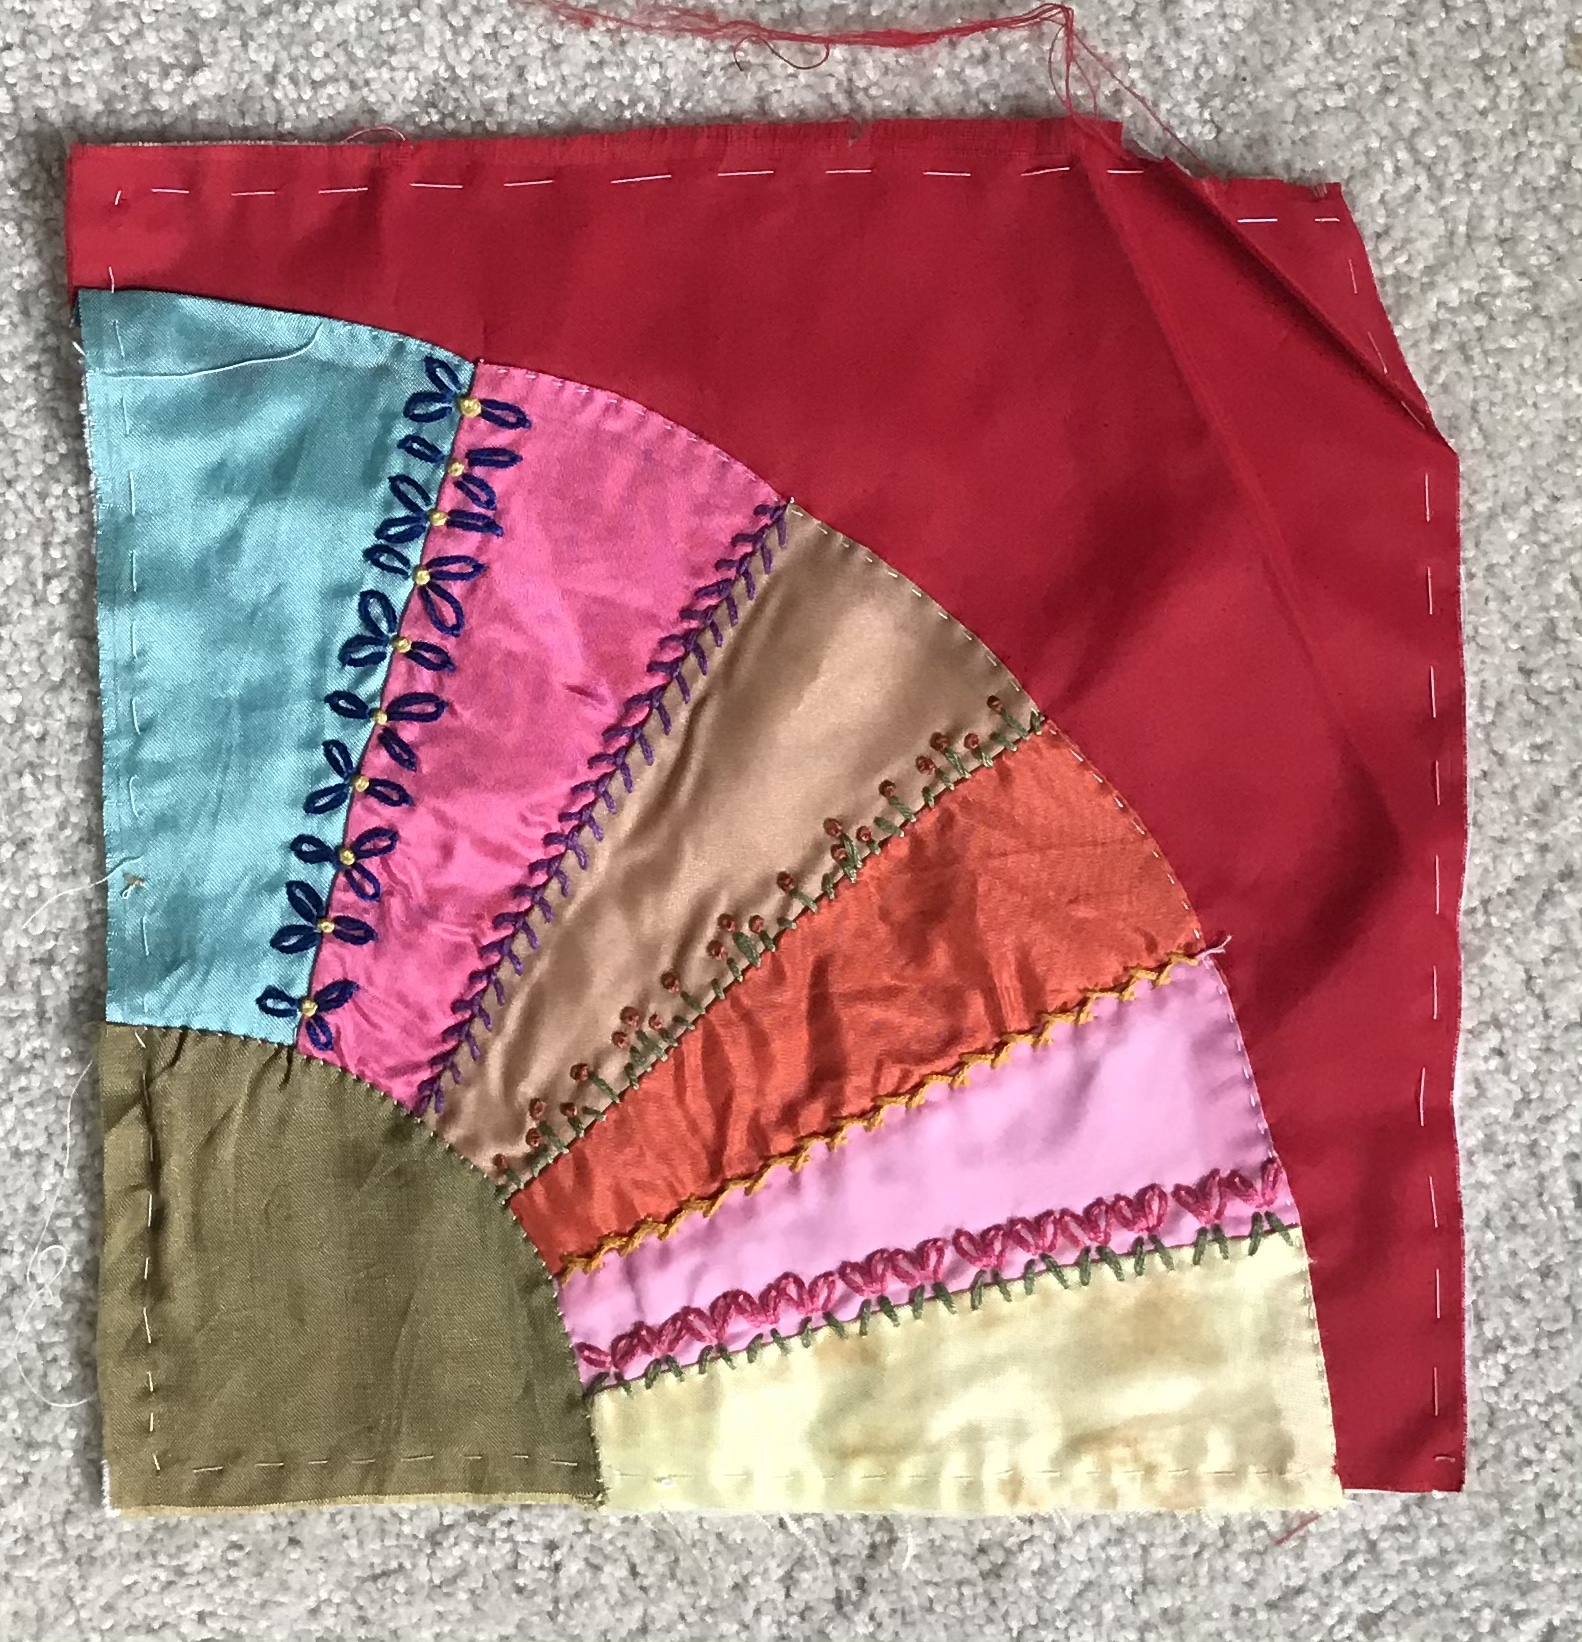 Red Snapper Storage - Quiltingboard Forums